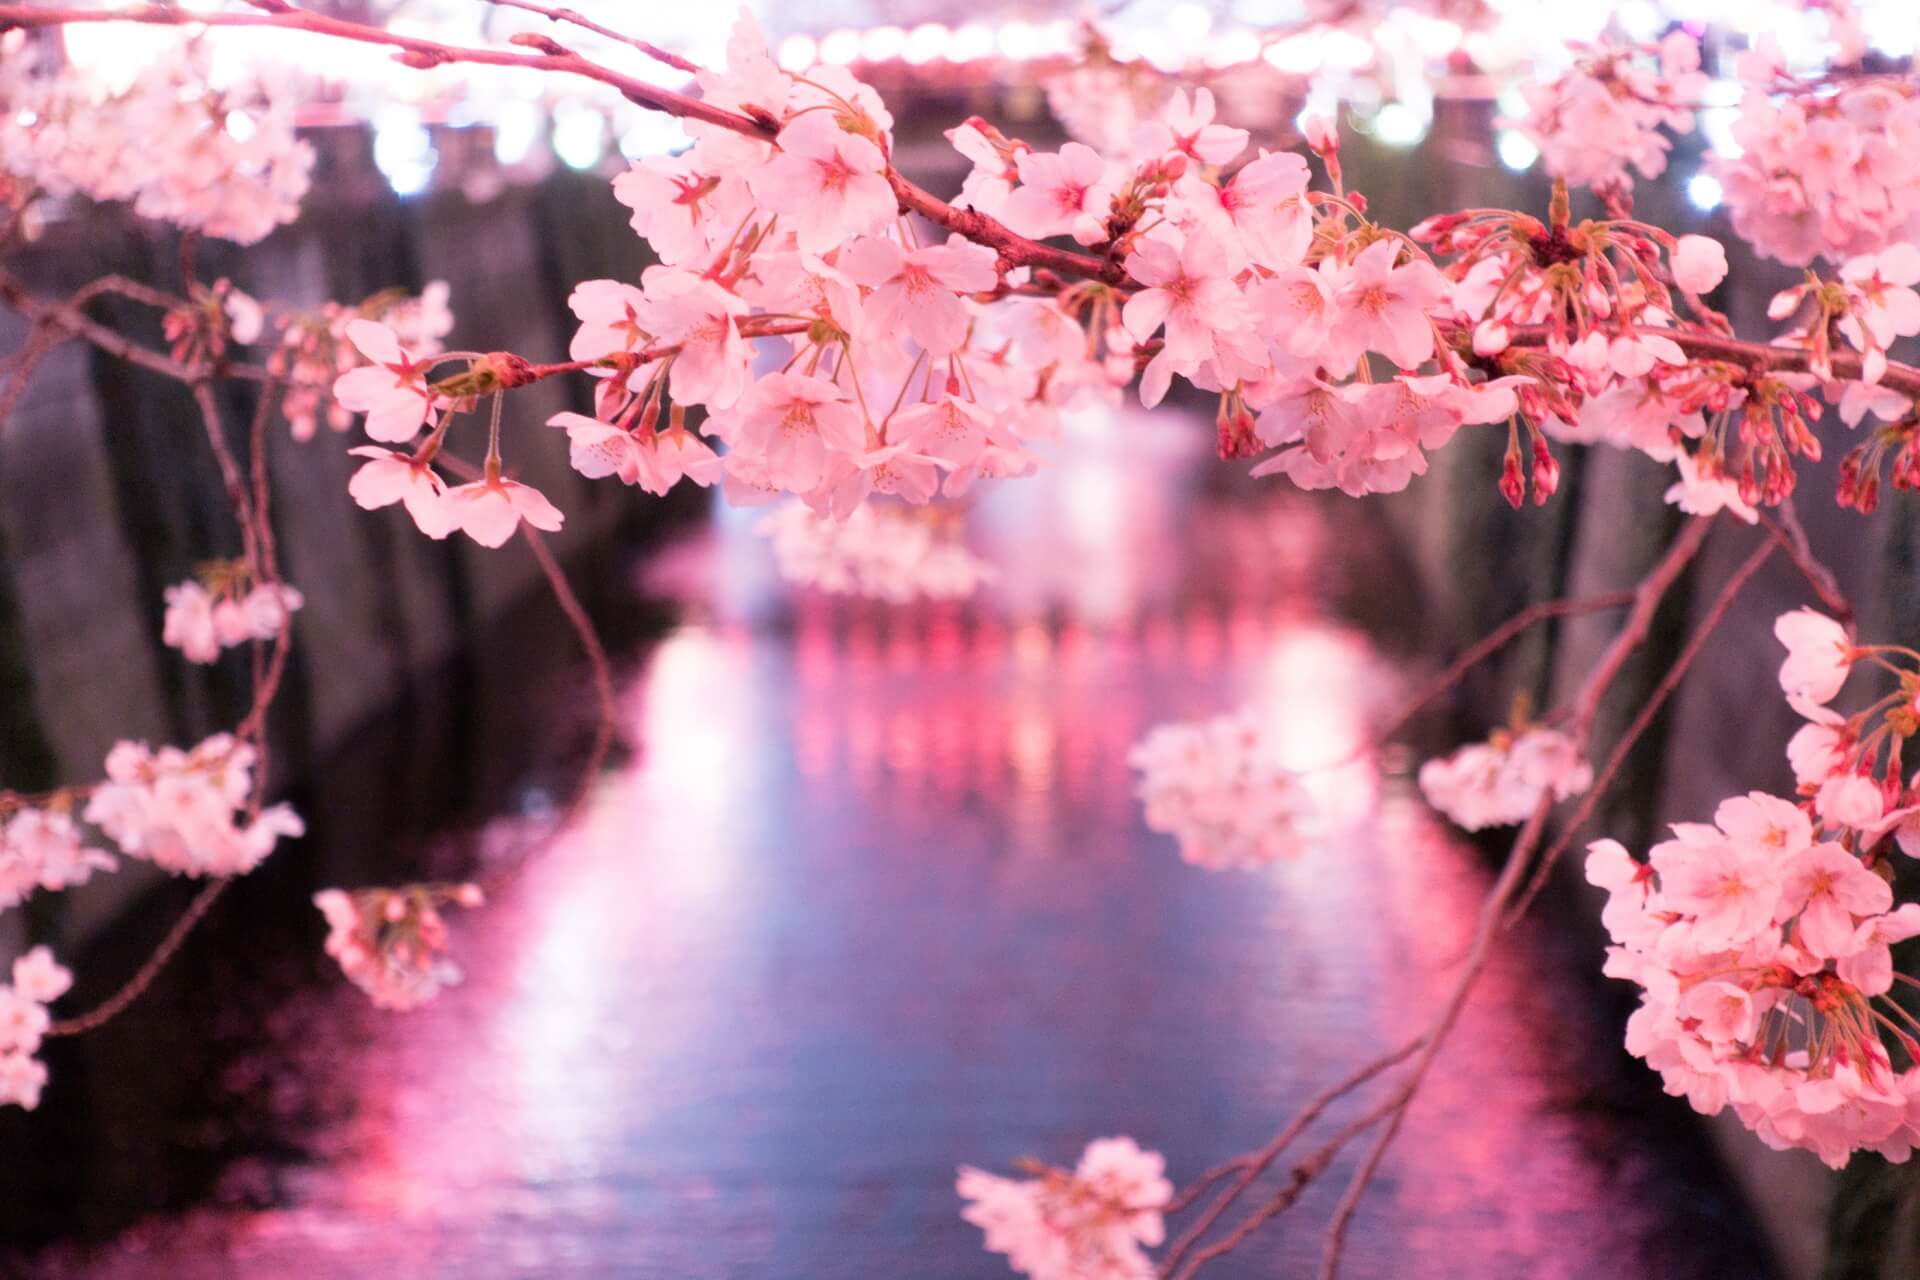 25 Best Places To See Cherry Blossoms In And Around Tokyo Snow Monkey